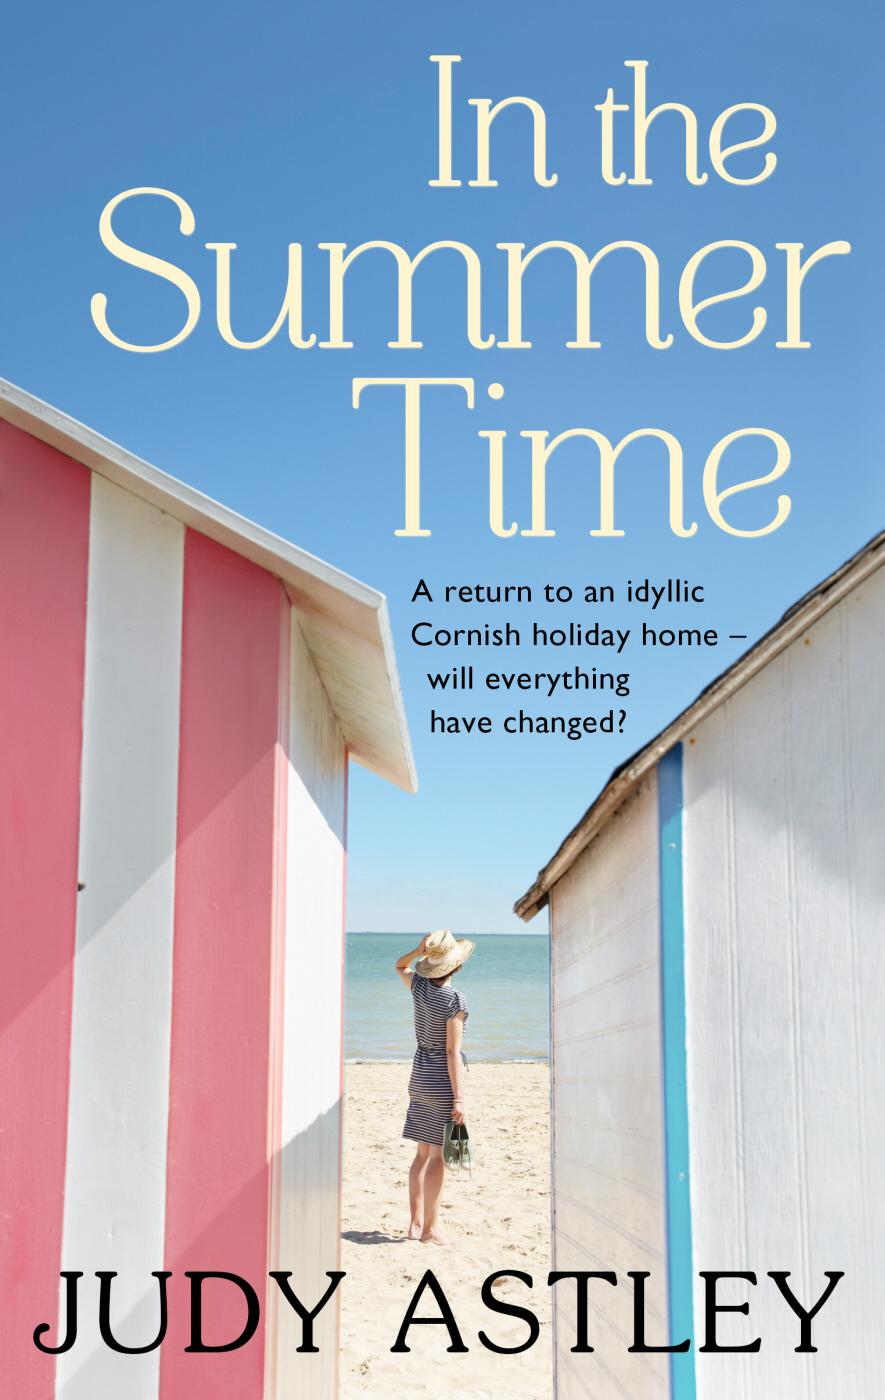 In the Summertime by Judy Astley